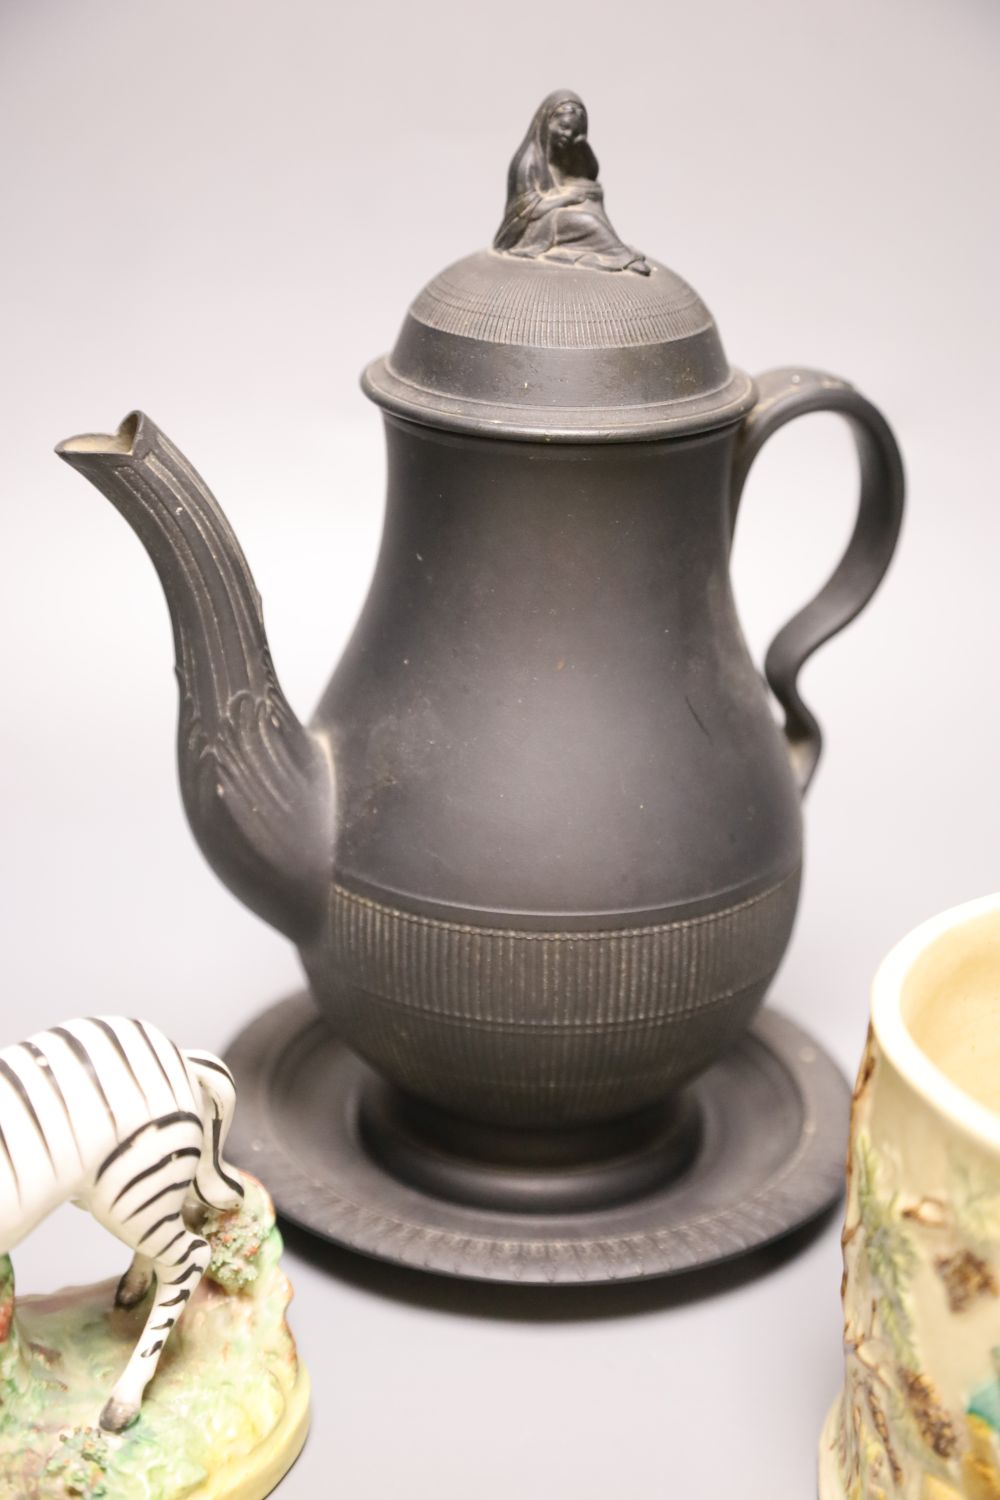 A 19th century Staffordshire pottery model of a zebra, a Victorian relief-moulded frog mug, a black basalt coffee pot with cover on sta